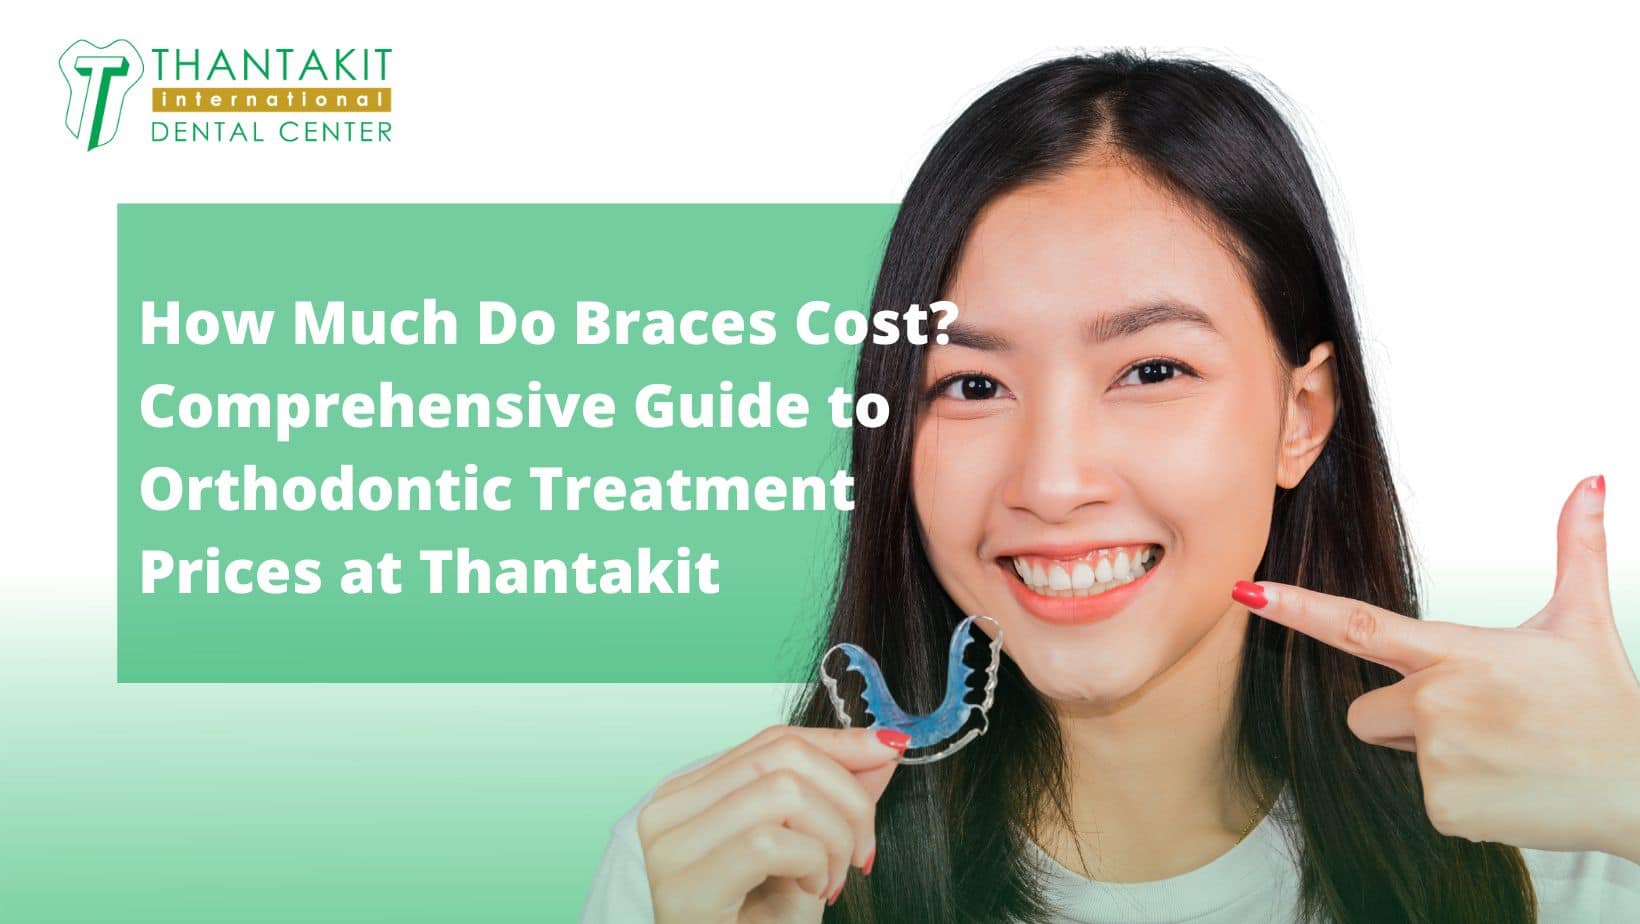 How Much Do Braces Cost? - Parade